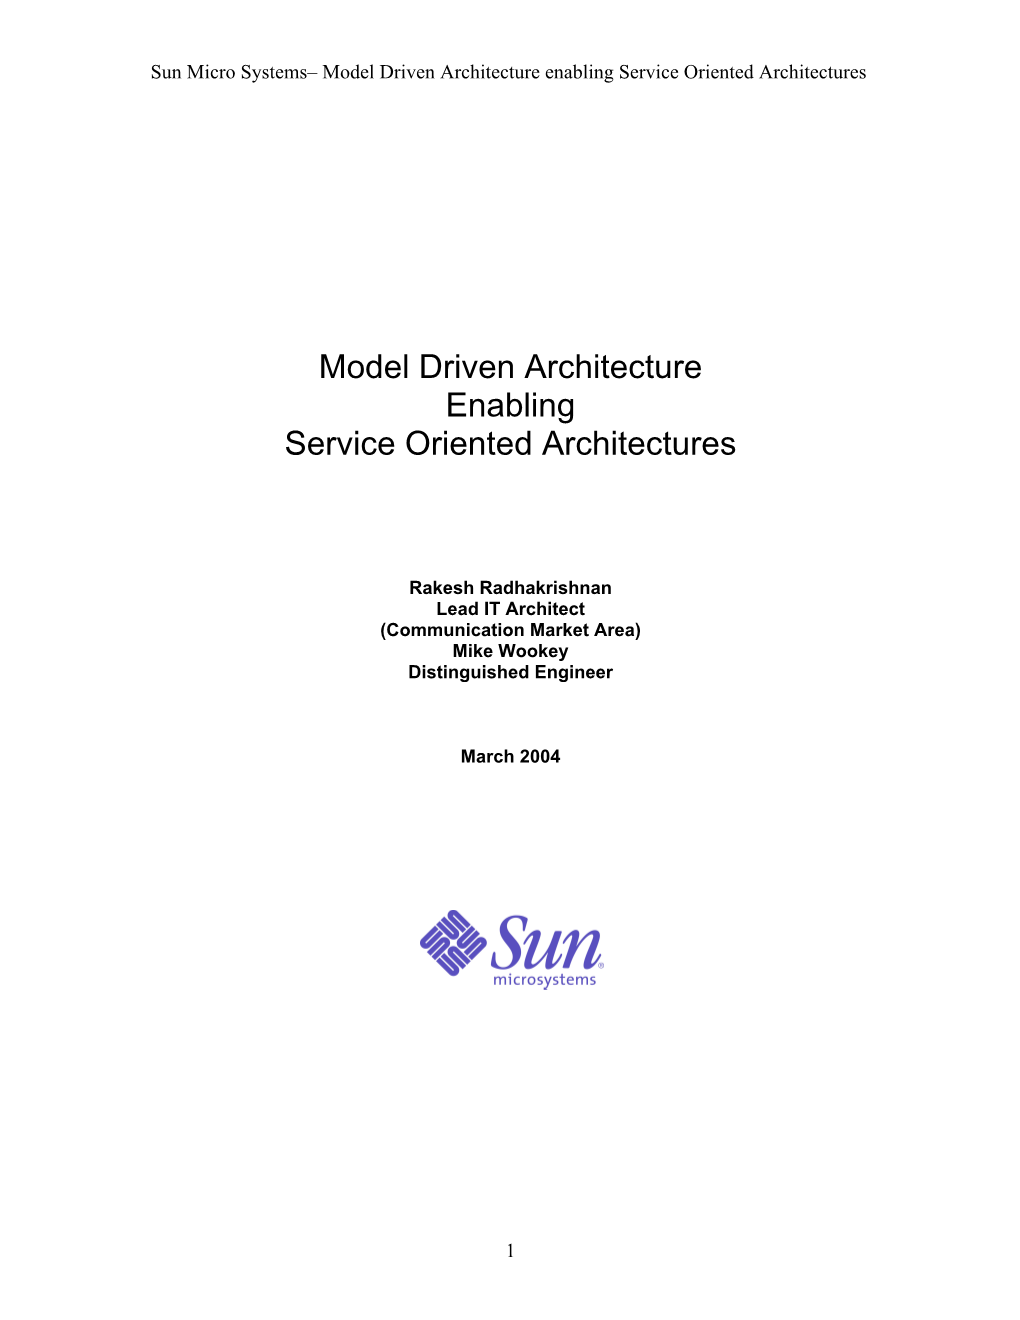 Model Driven Architecture Enabling Service Oriented Architectures